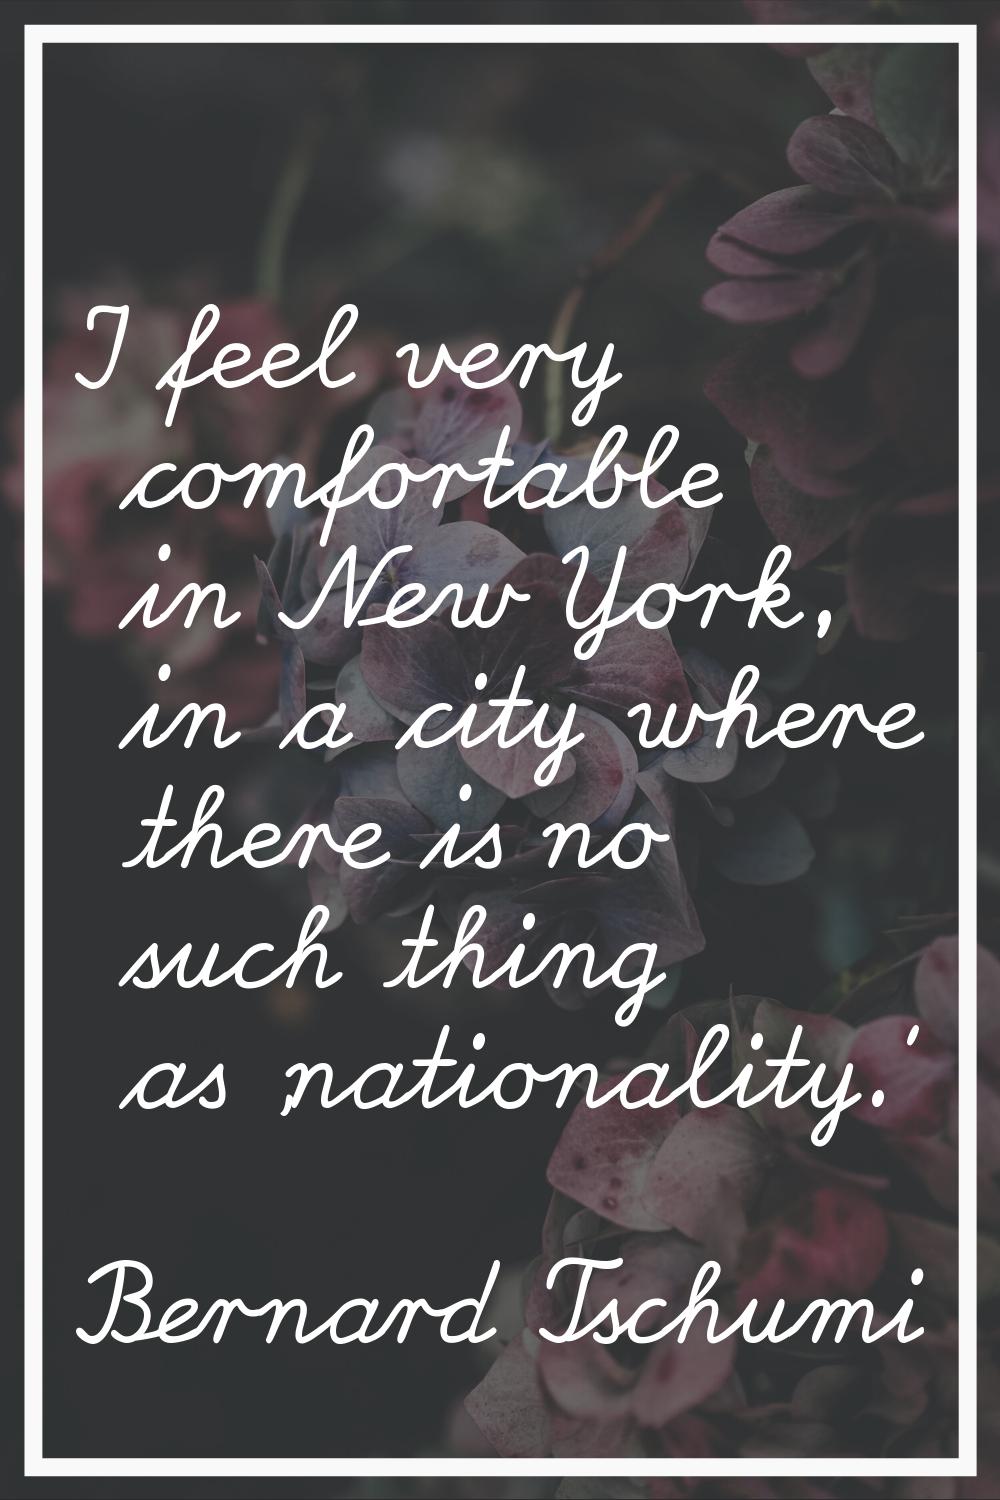 I feel very comfortable in New York, in a city where there is no such thing as 'nationality.'